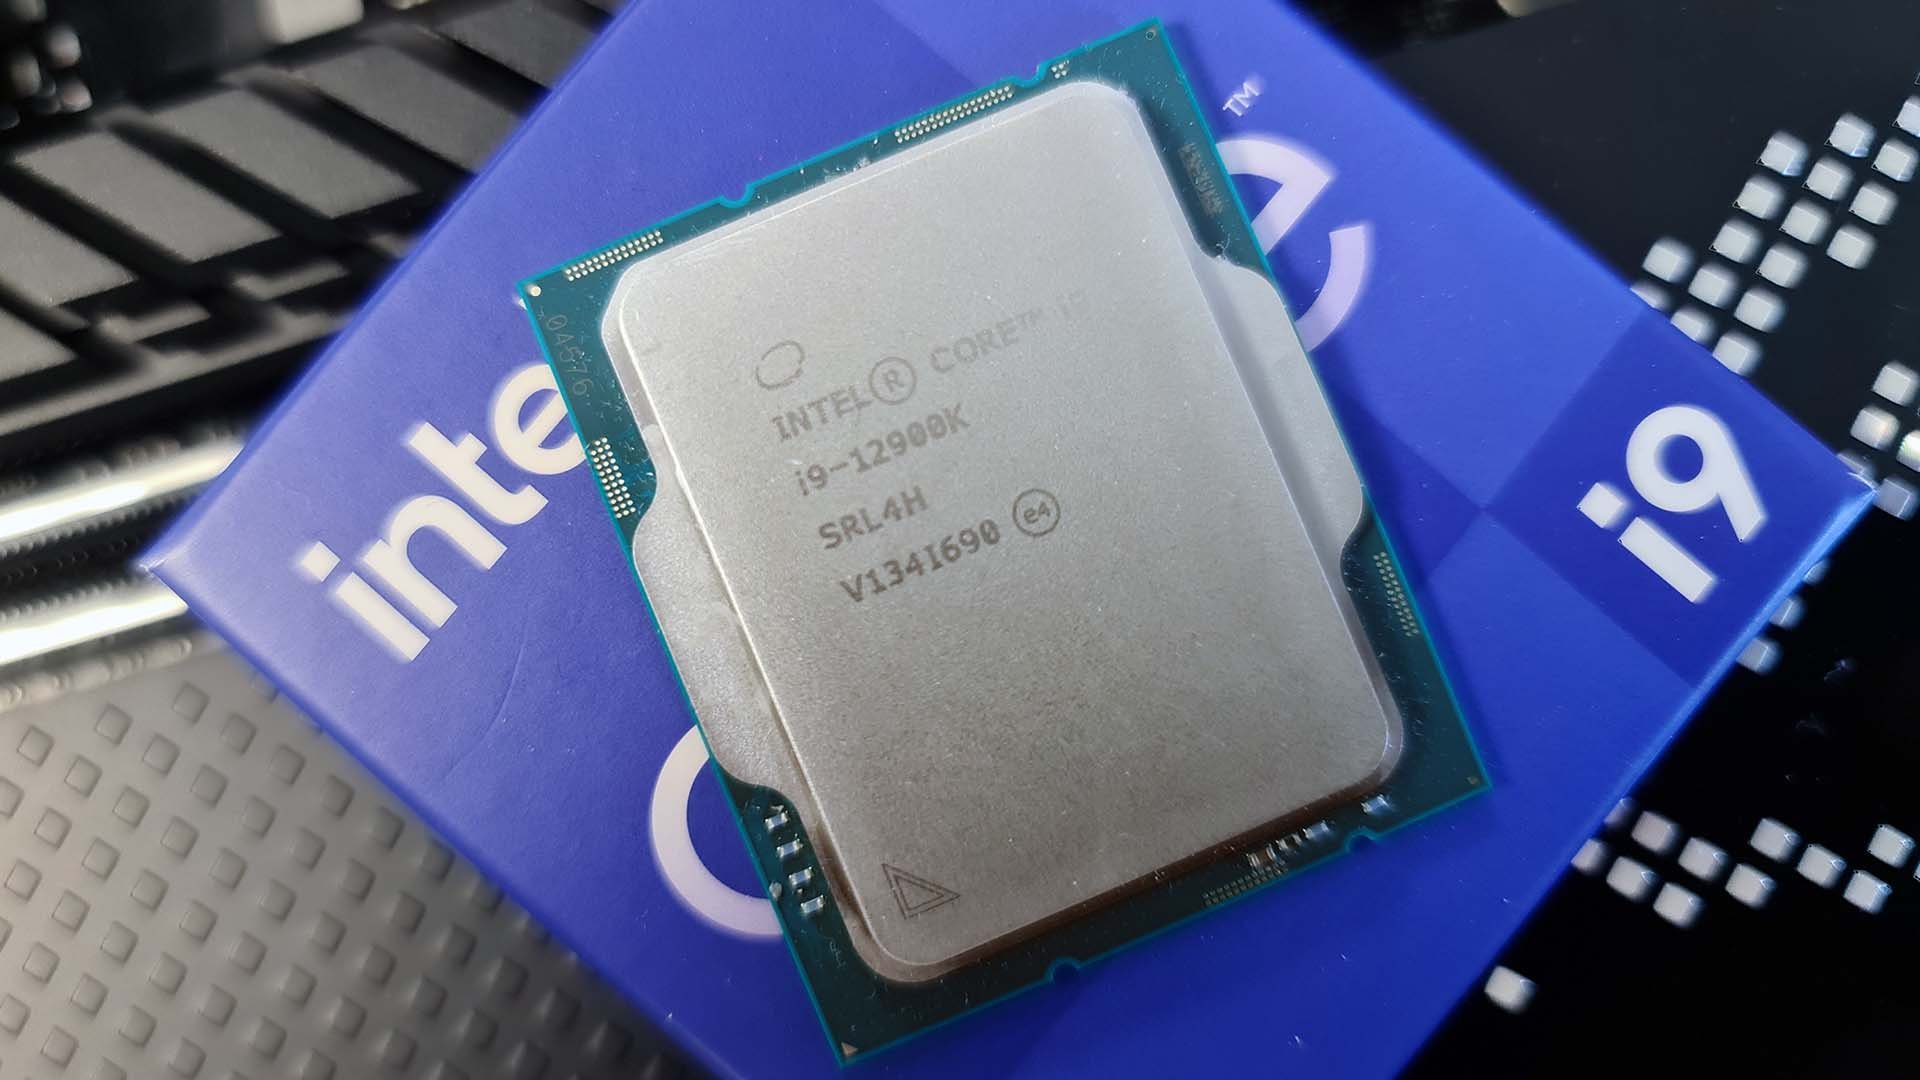 The main thing about the tests of the new Intel Core i9-12900K processor